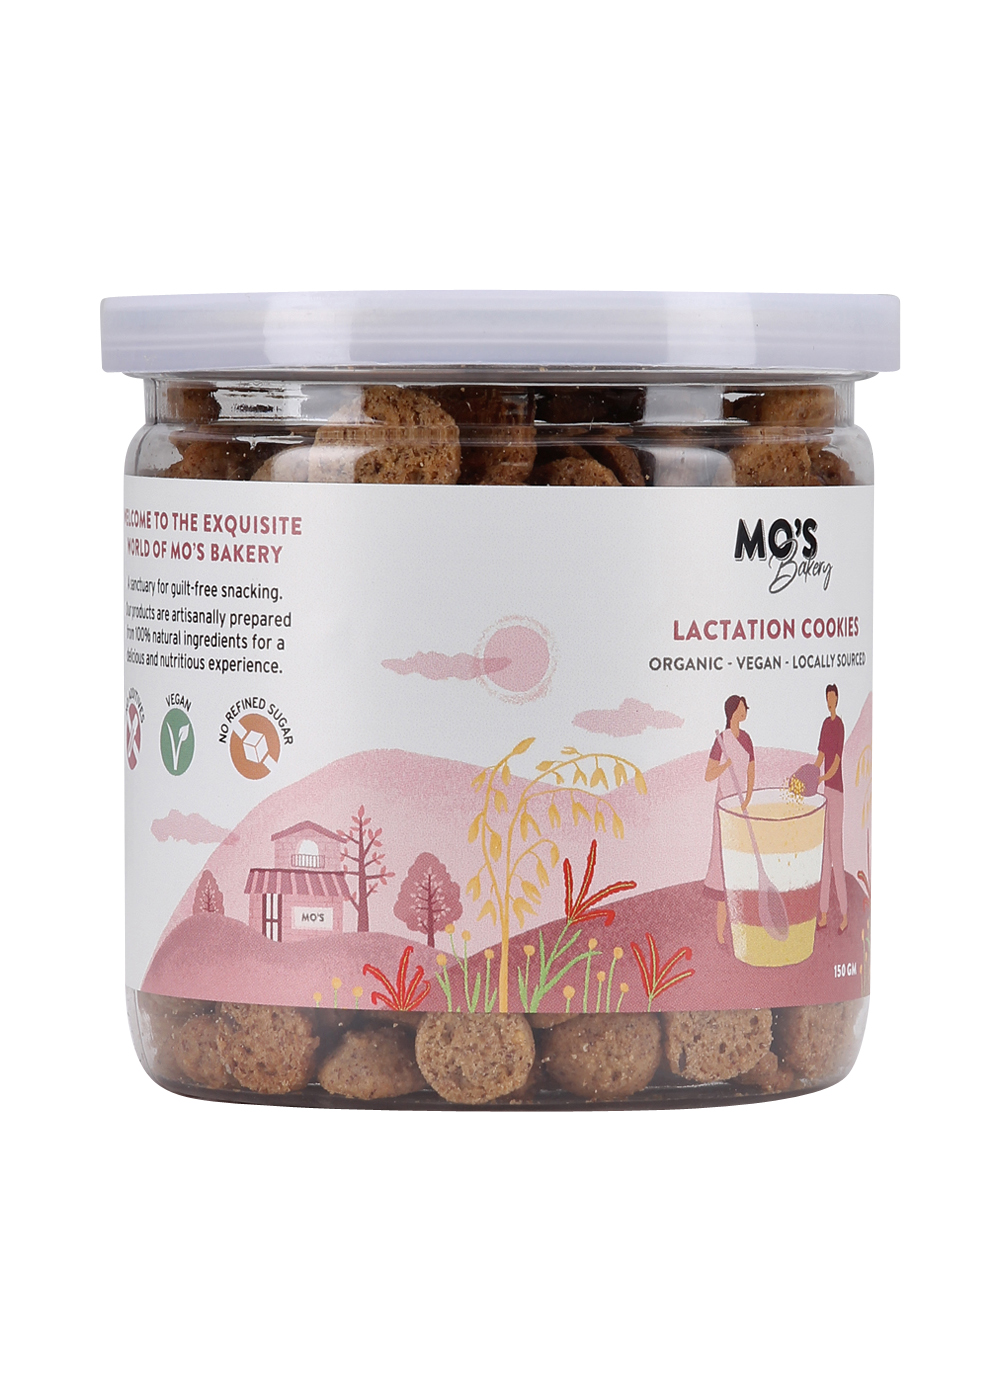 Product: Mo’s Bakery Lactation Cookies